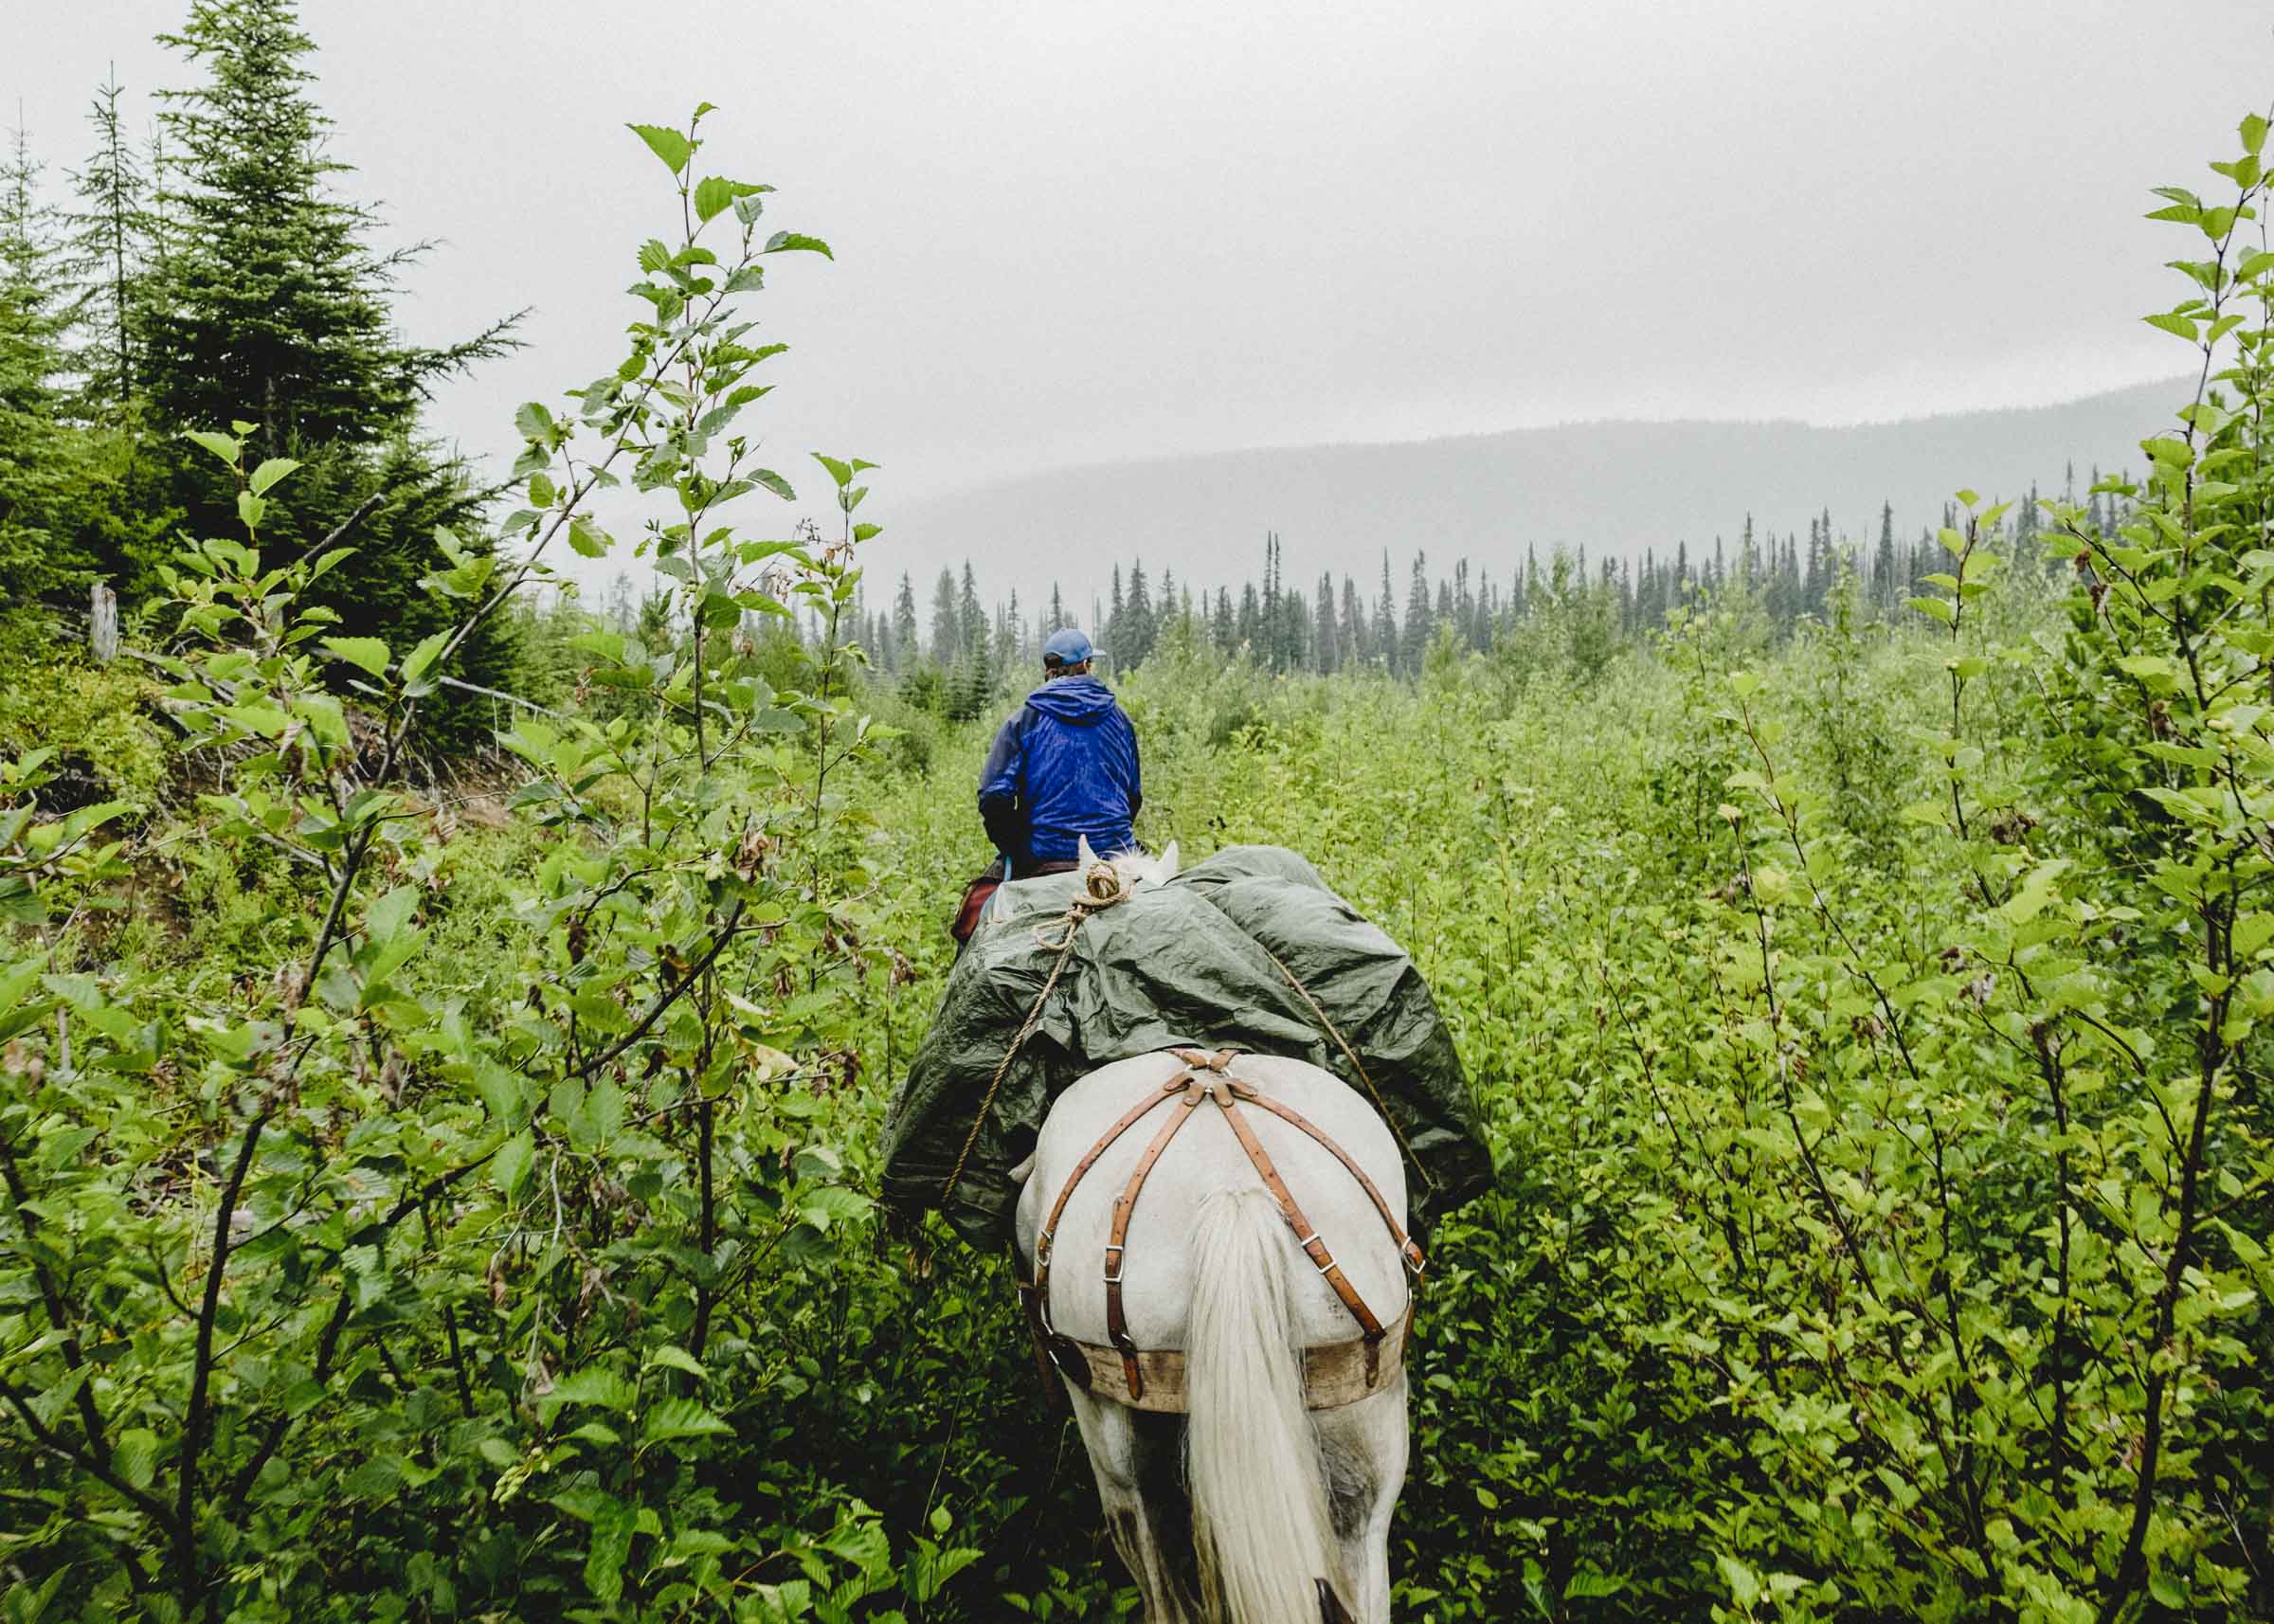 Horsepacking through the alder thickets